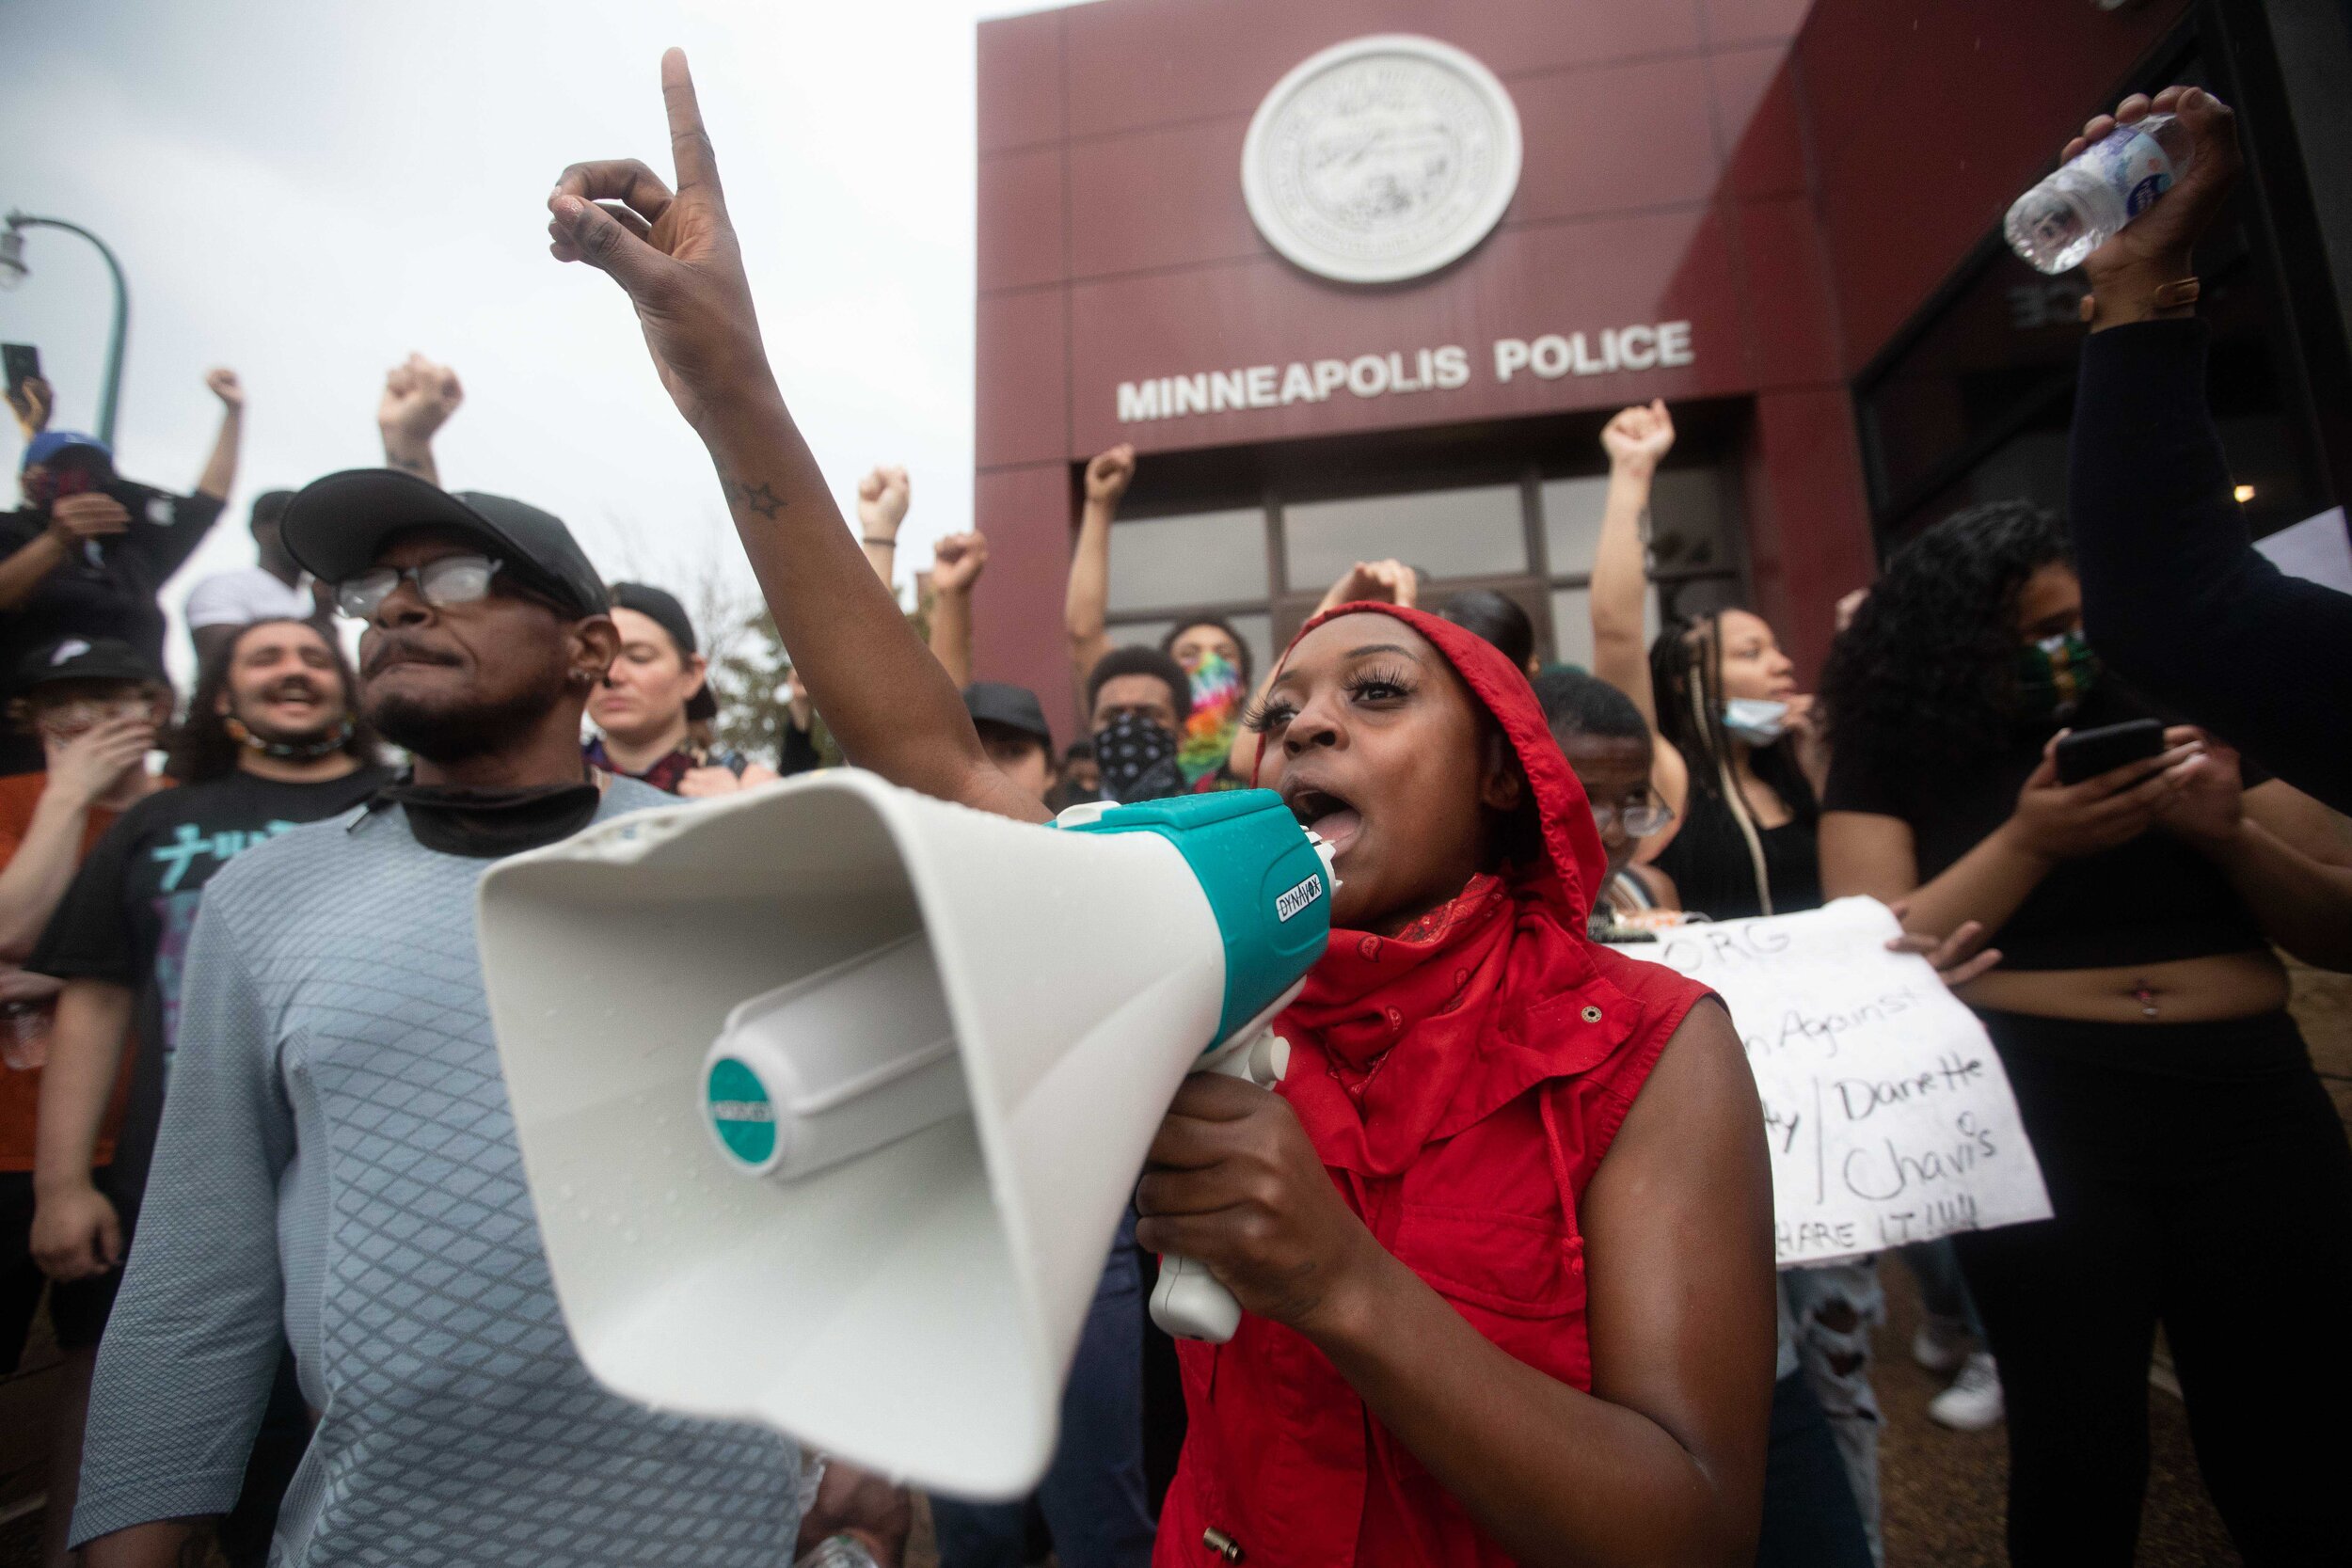  Speaking to the crowd, a protester talks in front of the Minneapolis 3rd police precinct during a protest over the police killing of George Floyd in Minneapolis, Minnesota on May 26, 2020. 